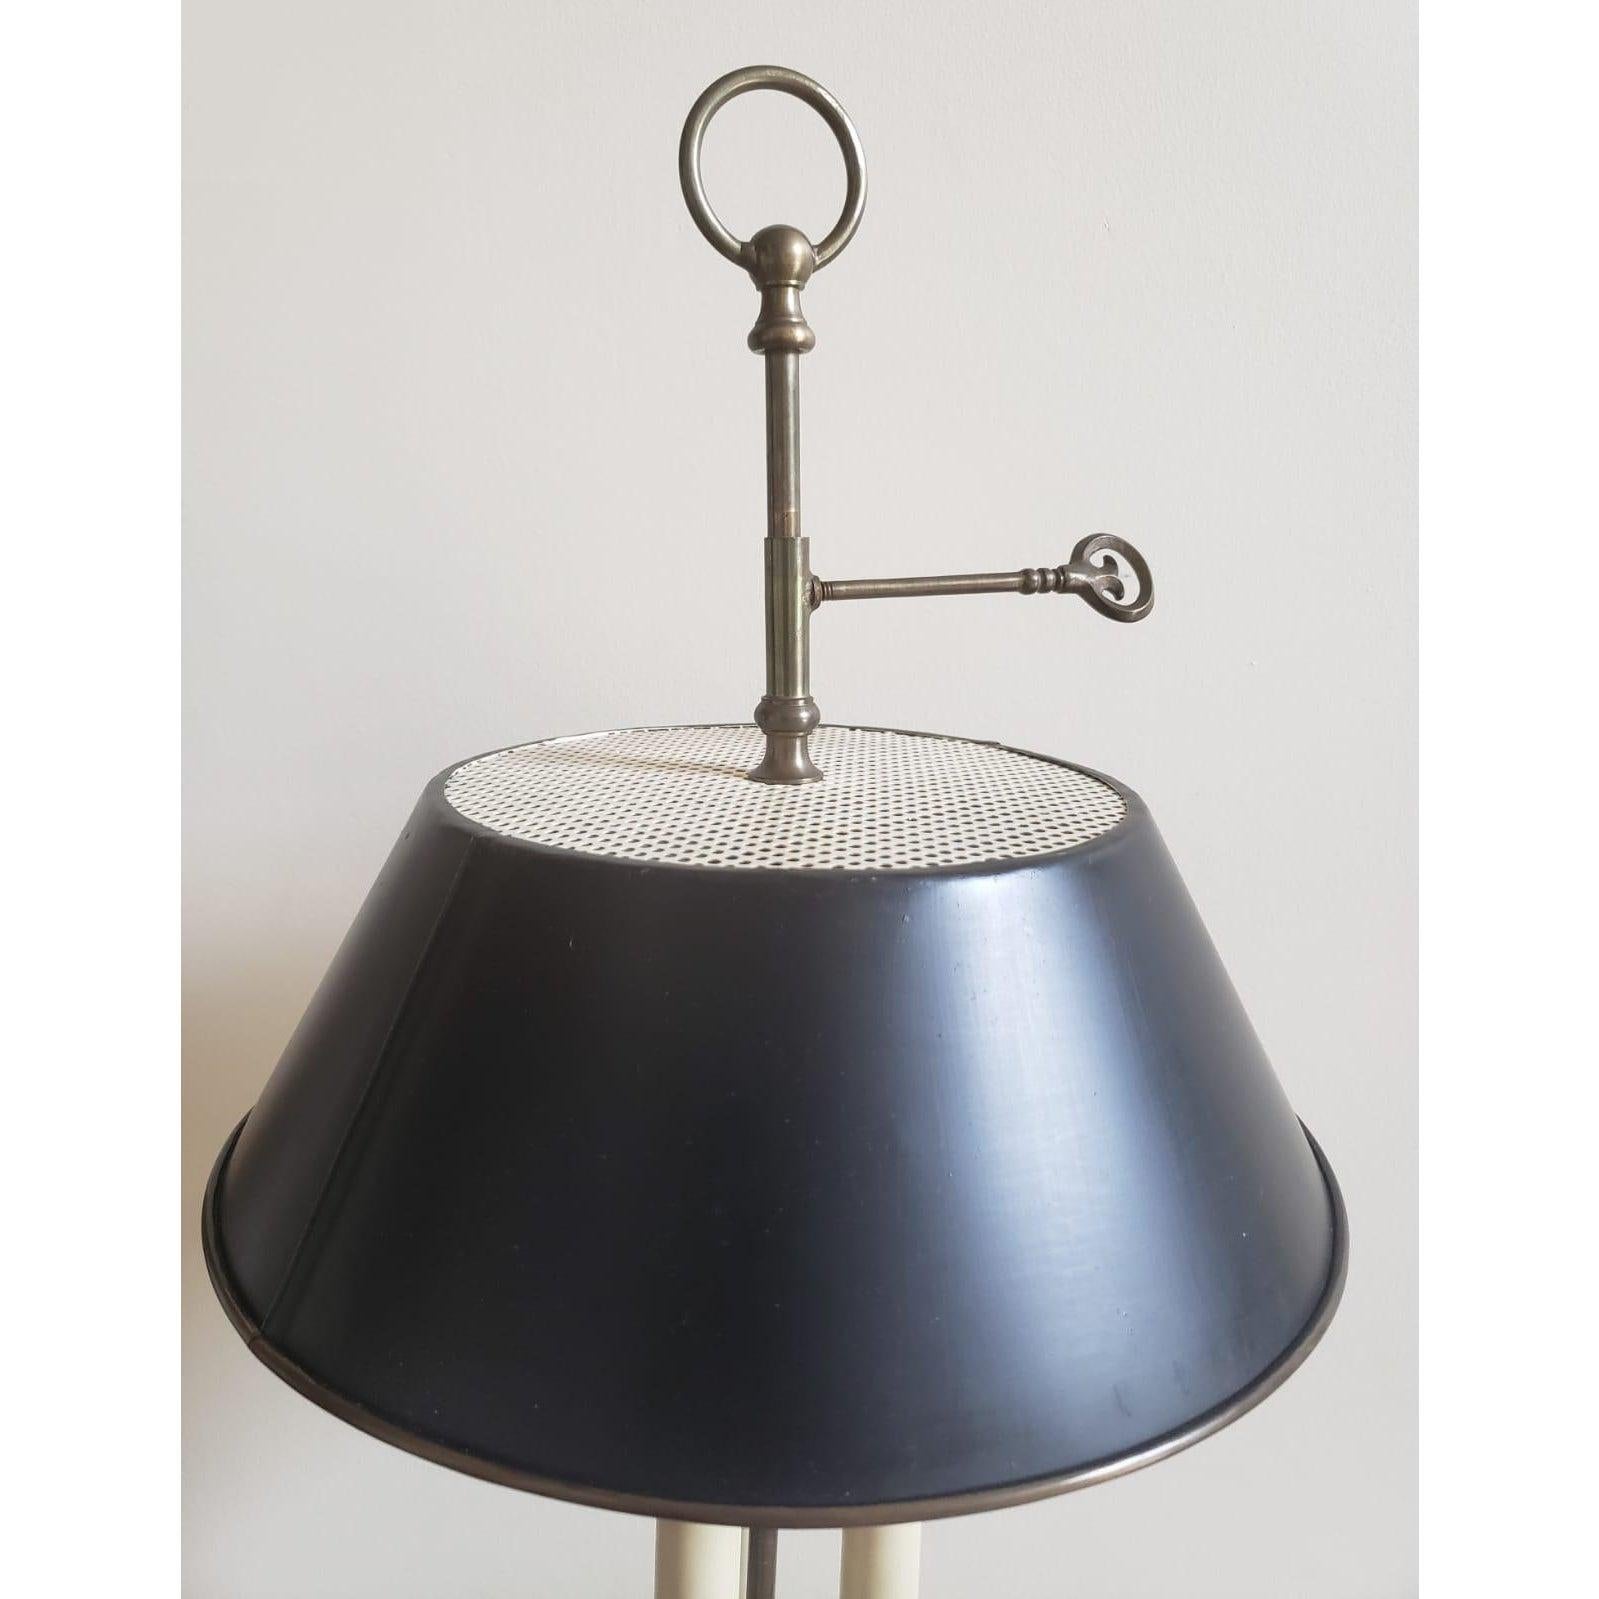 Hand-Crafted 1972 Chapman patinated Metal Bouillotte Lamp with Tole Shade